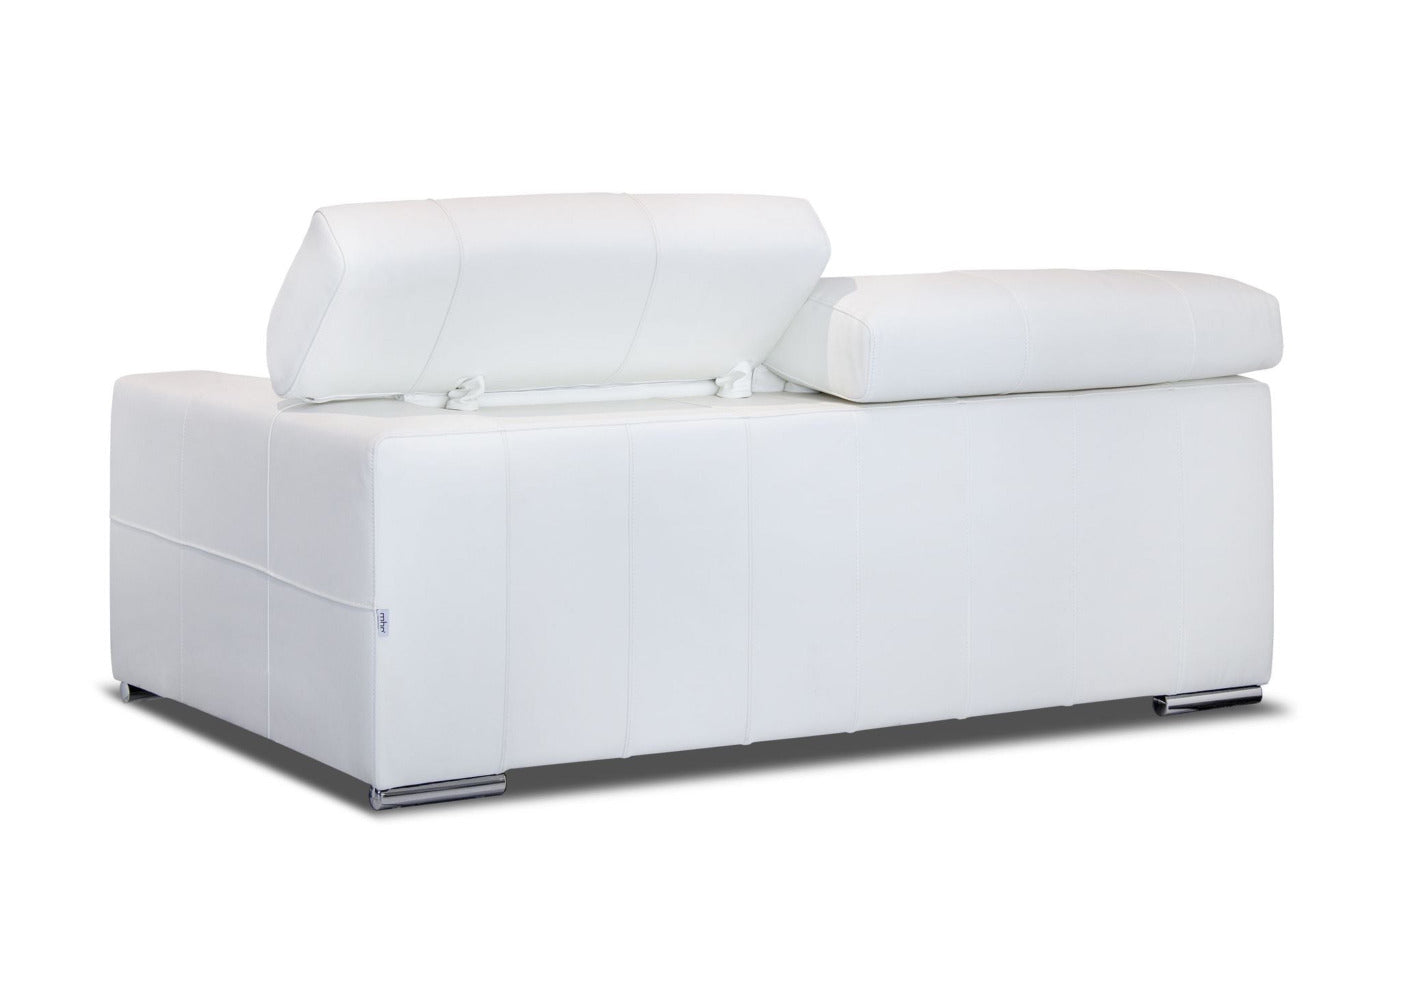 Luanda 2 seater white leather sofa with adjustable headrests. Back view of the sofa.